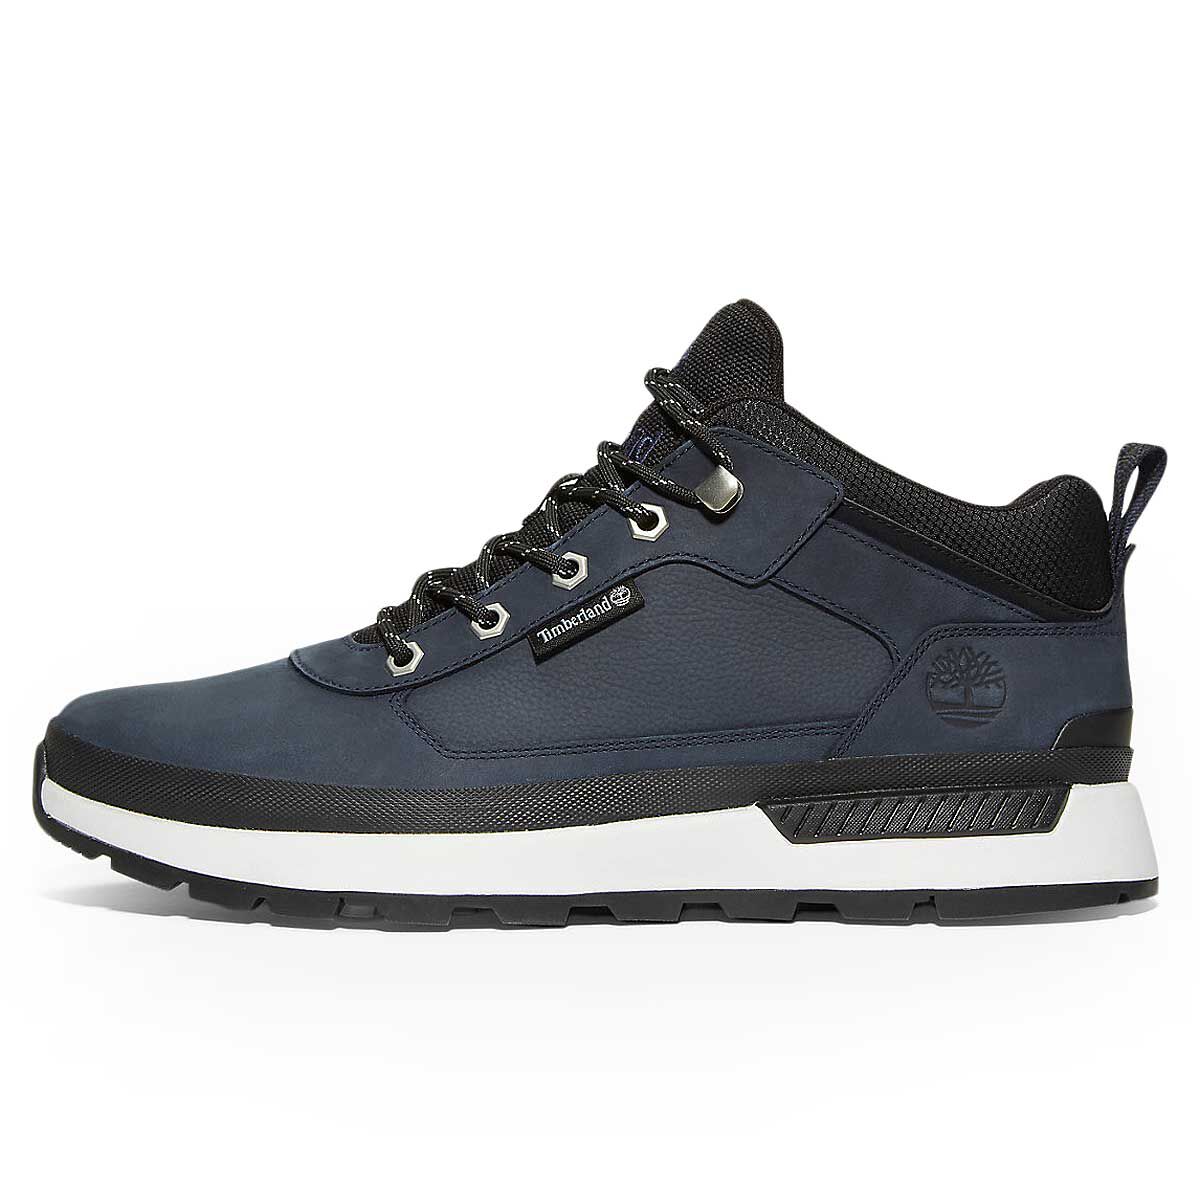 Find a big range of Timberland products online at KICKZ